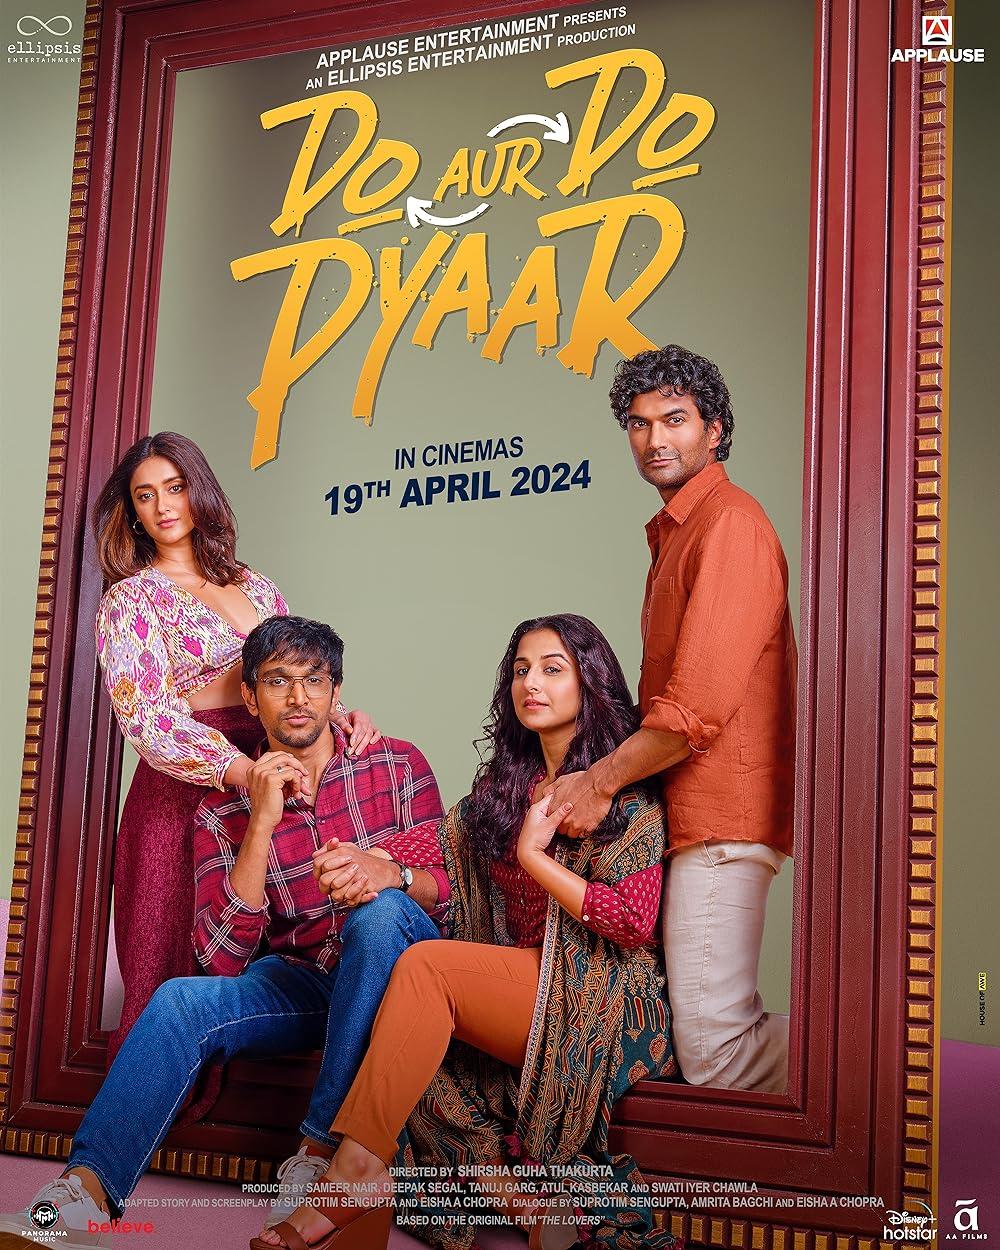 Do Aur Do Pyaar (Hindi) - April 19Get ready for a refreshing take on love and marriage with 'Do Aur Do Pyaar, featuring an unconventional cast including Vidya Balan, Pratik Gandhi, Ileana D’Cruz, and Sendhil Ramamurthy. Directed by Shirsha Guha Thakurta, the quirky romcom promises to explore the complexities of marital relationships with humour and heart. Brace yourself for laughter, love, and unexpected twists in this must-watch romantic comedy.